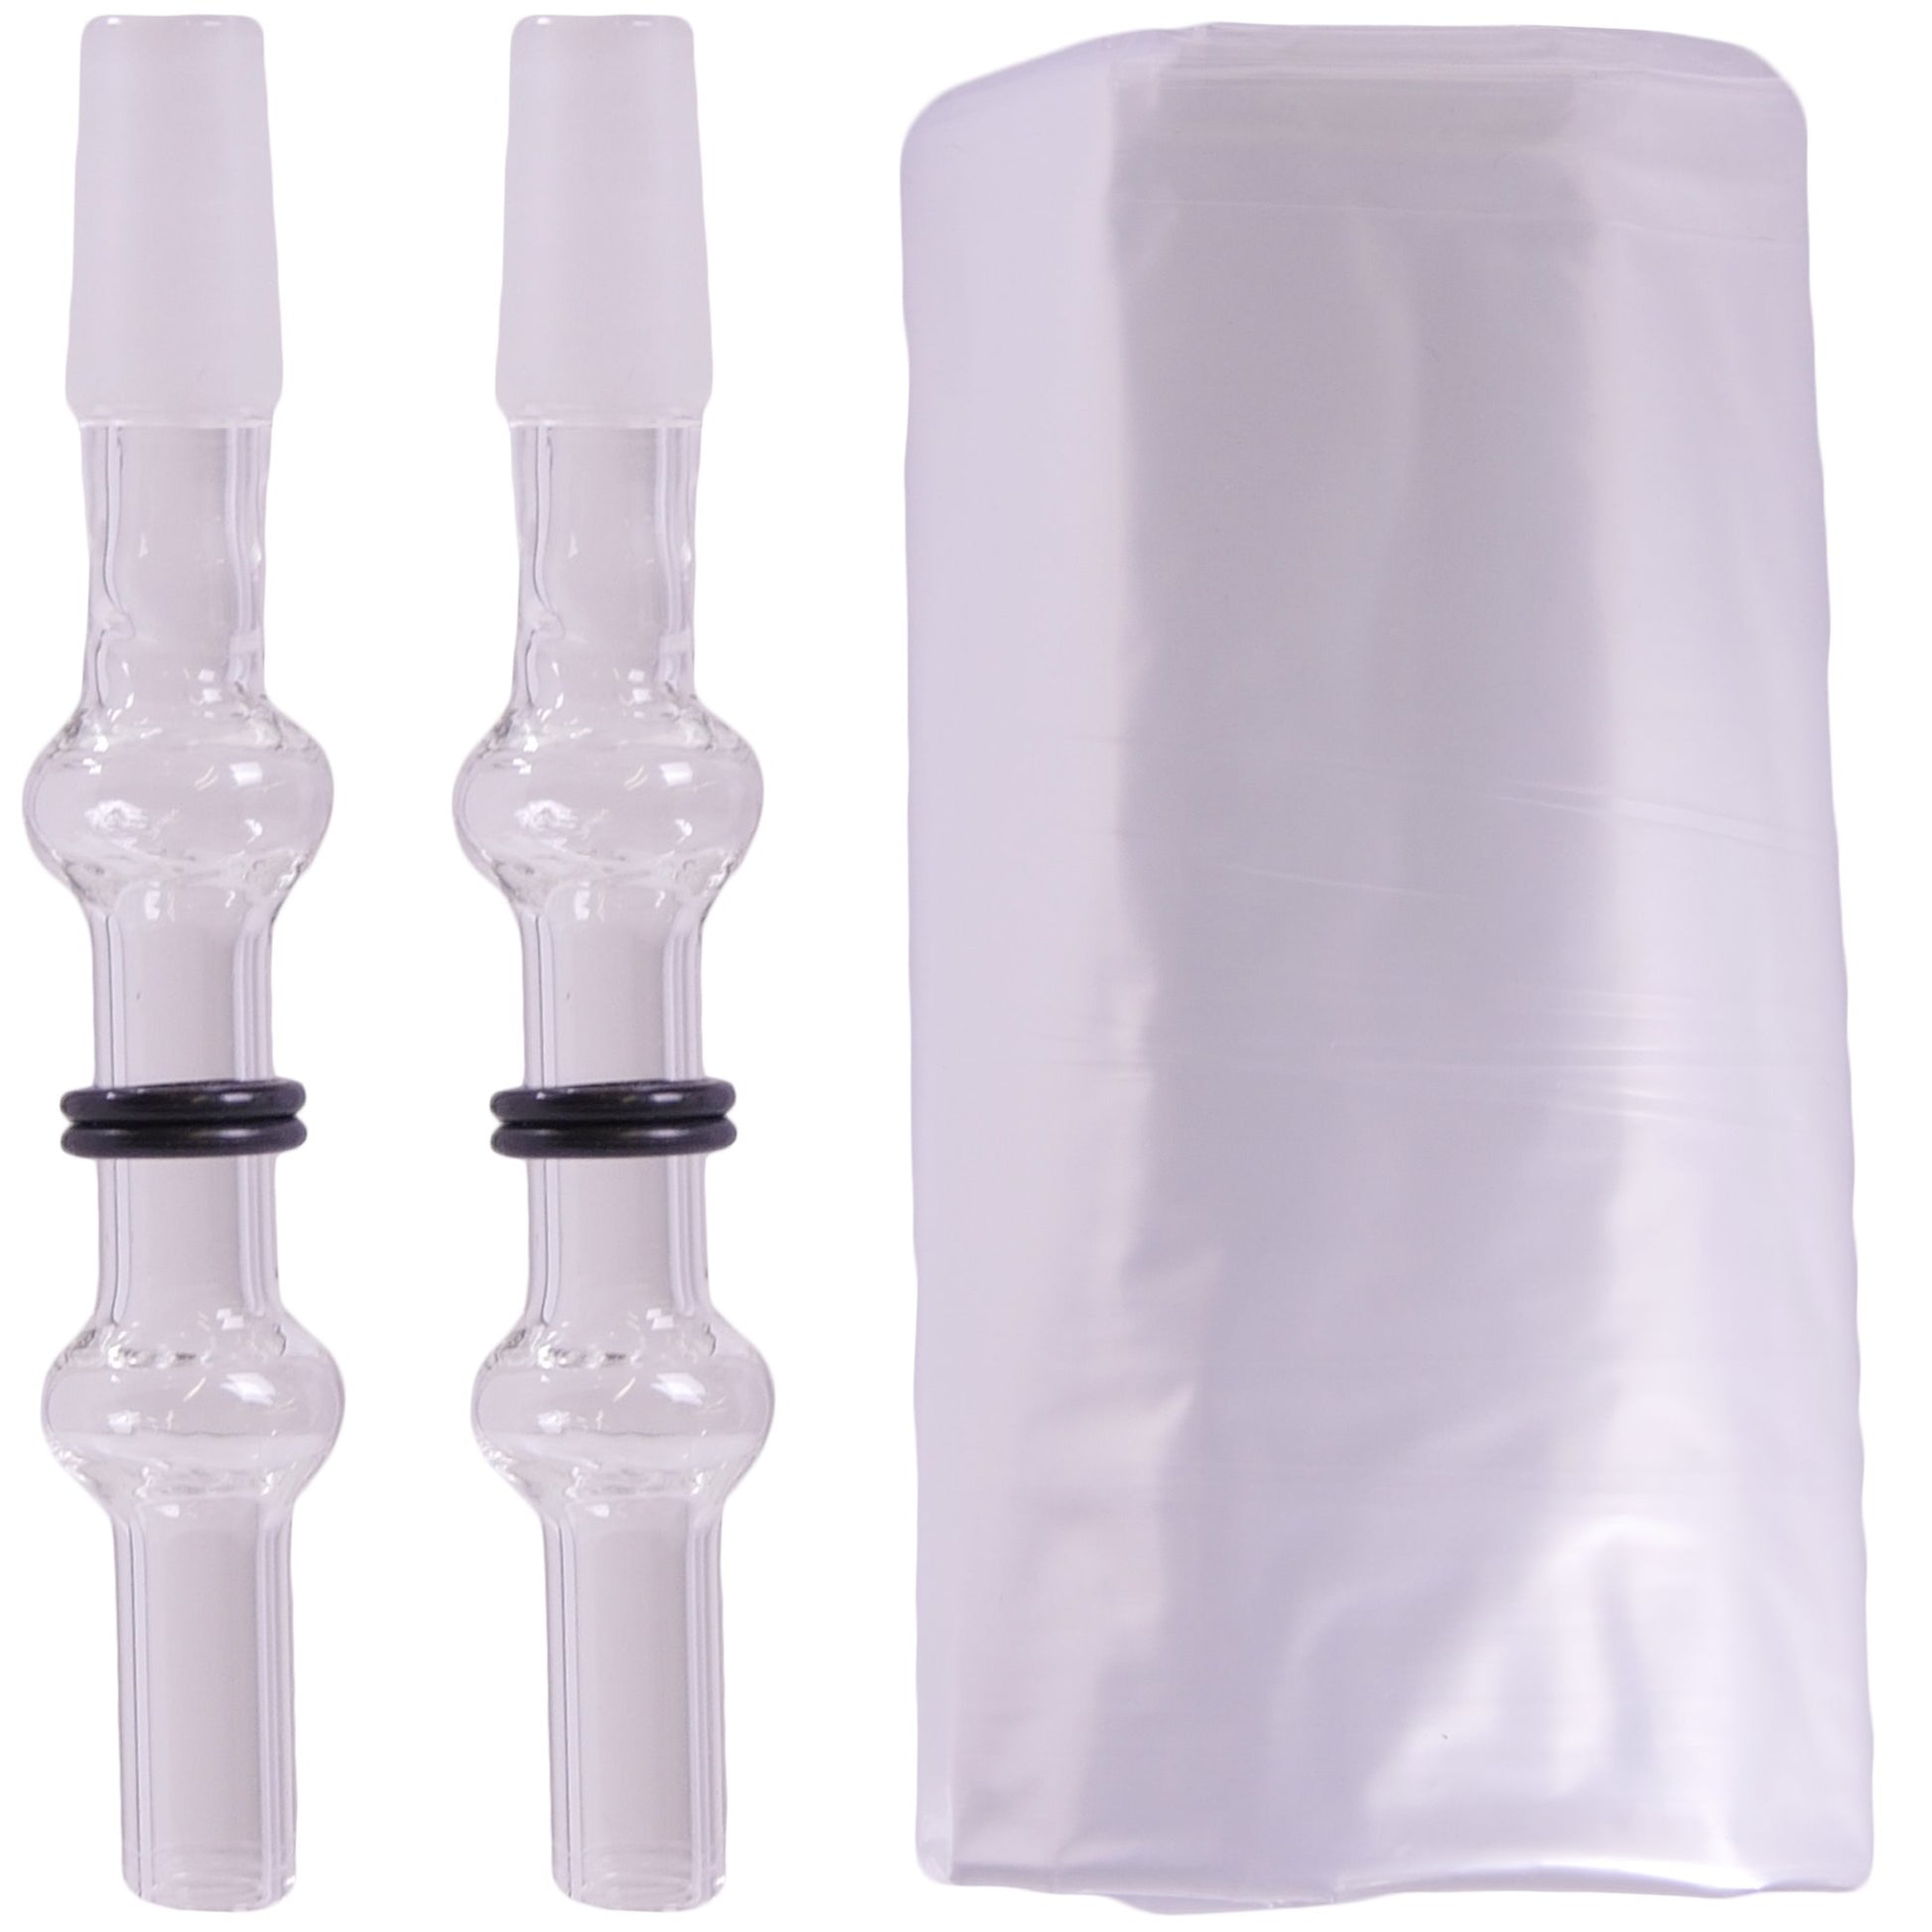 Arizer Replacement Balloon Kit For Extreme Q Vaporizers Arizer 